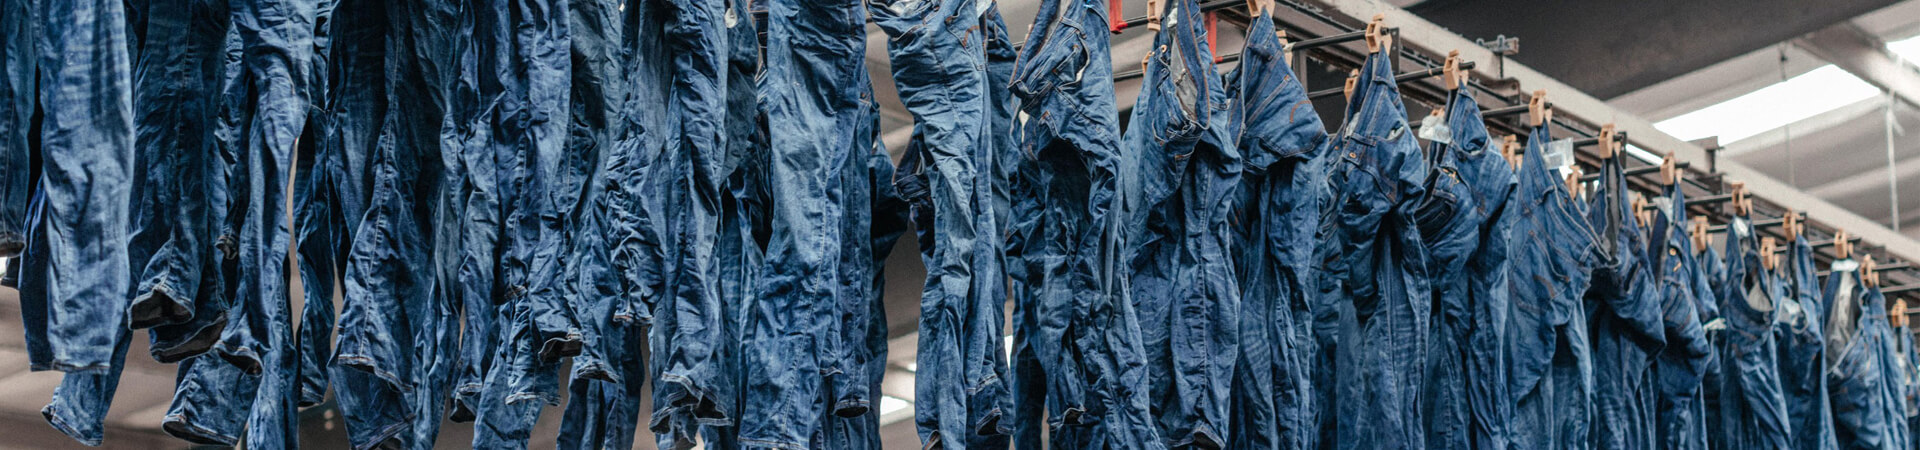 Jeans production (air-dried)